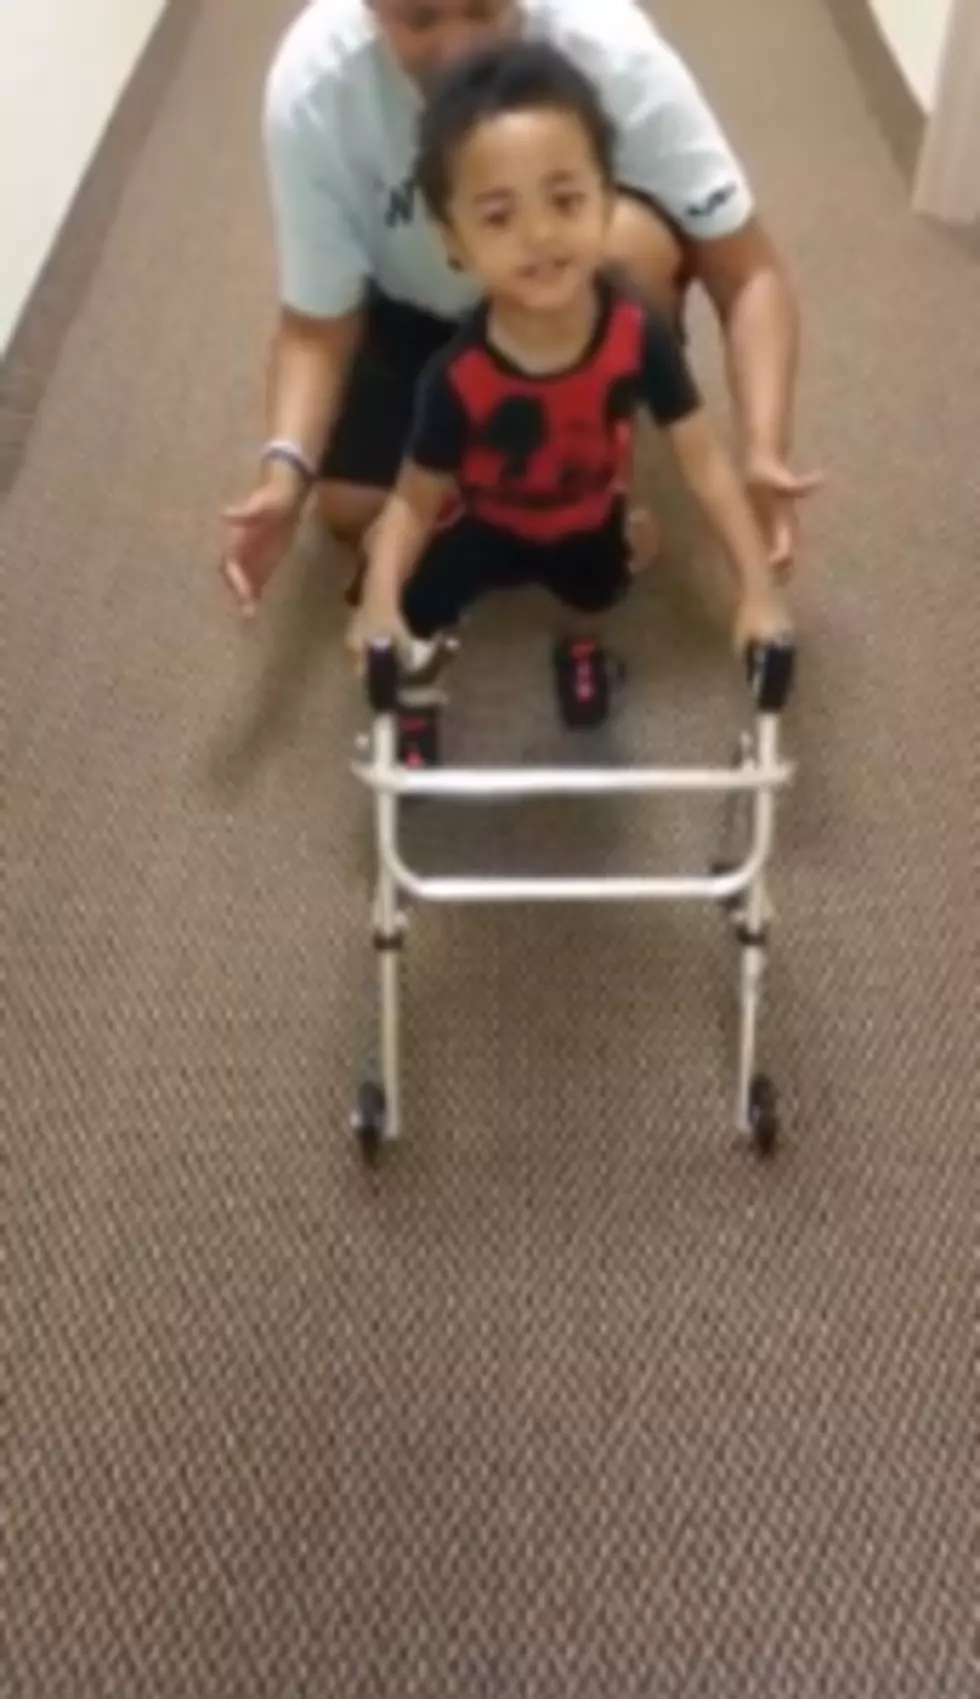 Watch: Toddler learns to walk again after amputations 